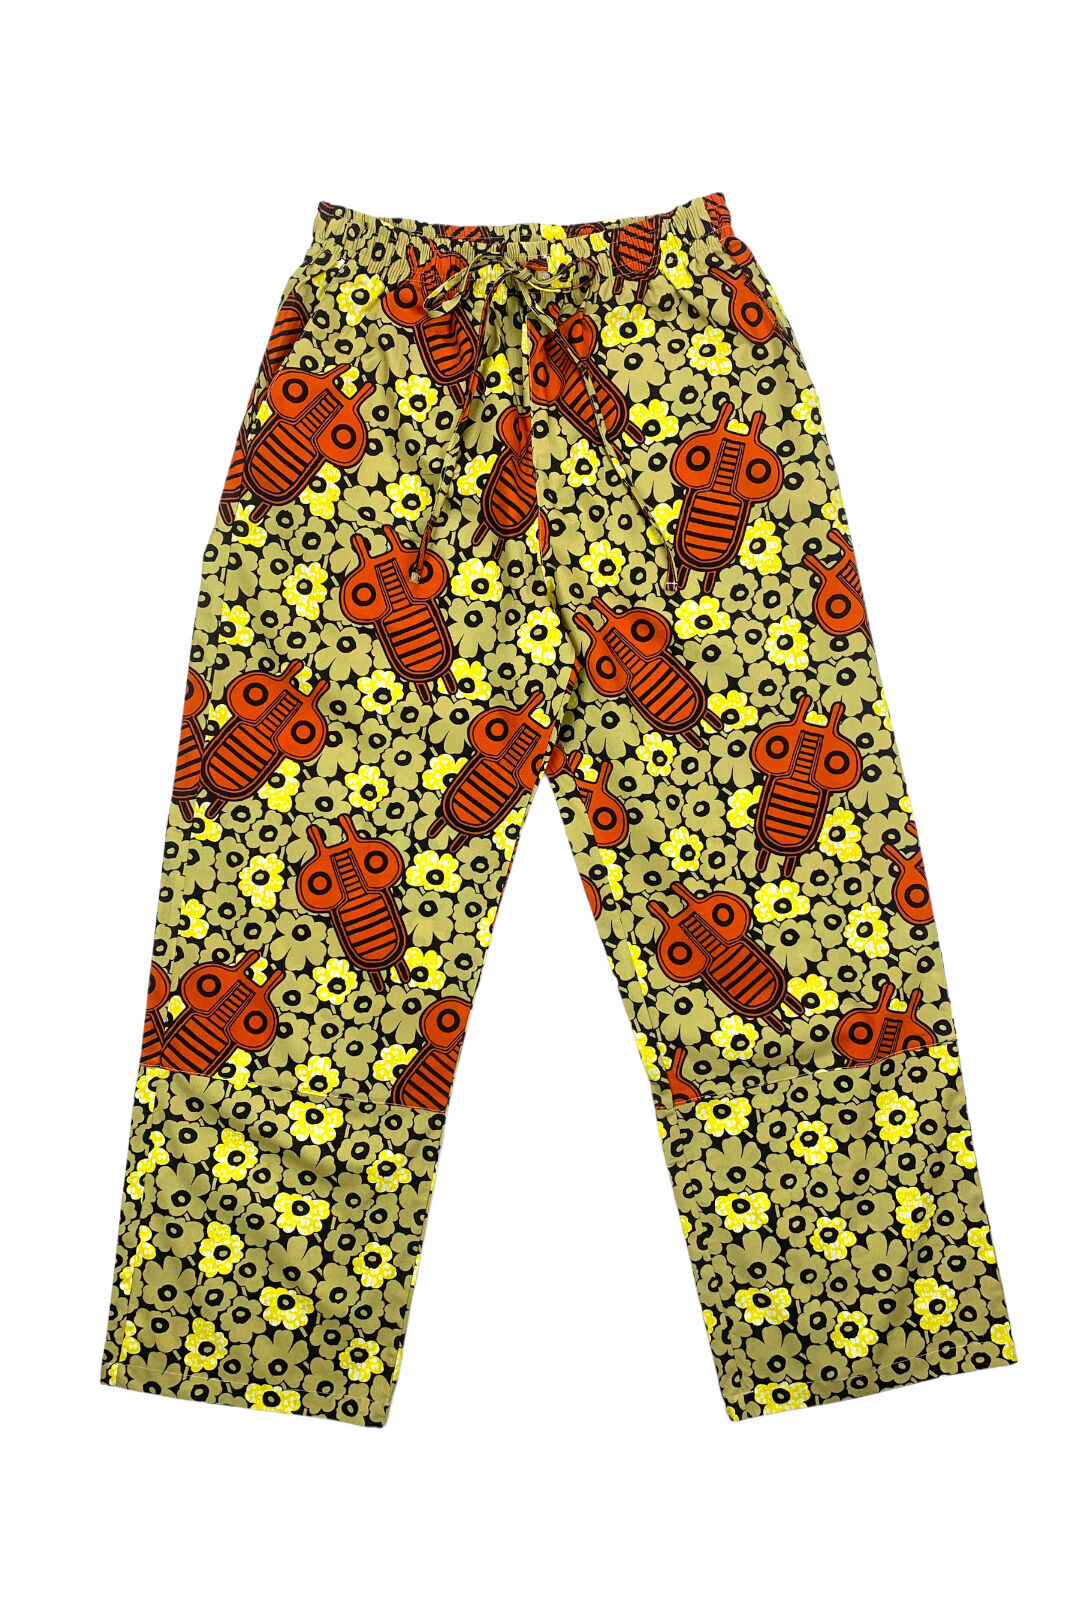 AFRICAN TWO PATTERN DESIGN PANTS